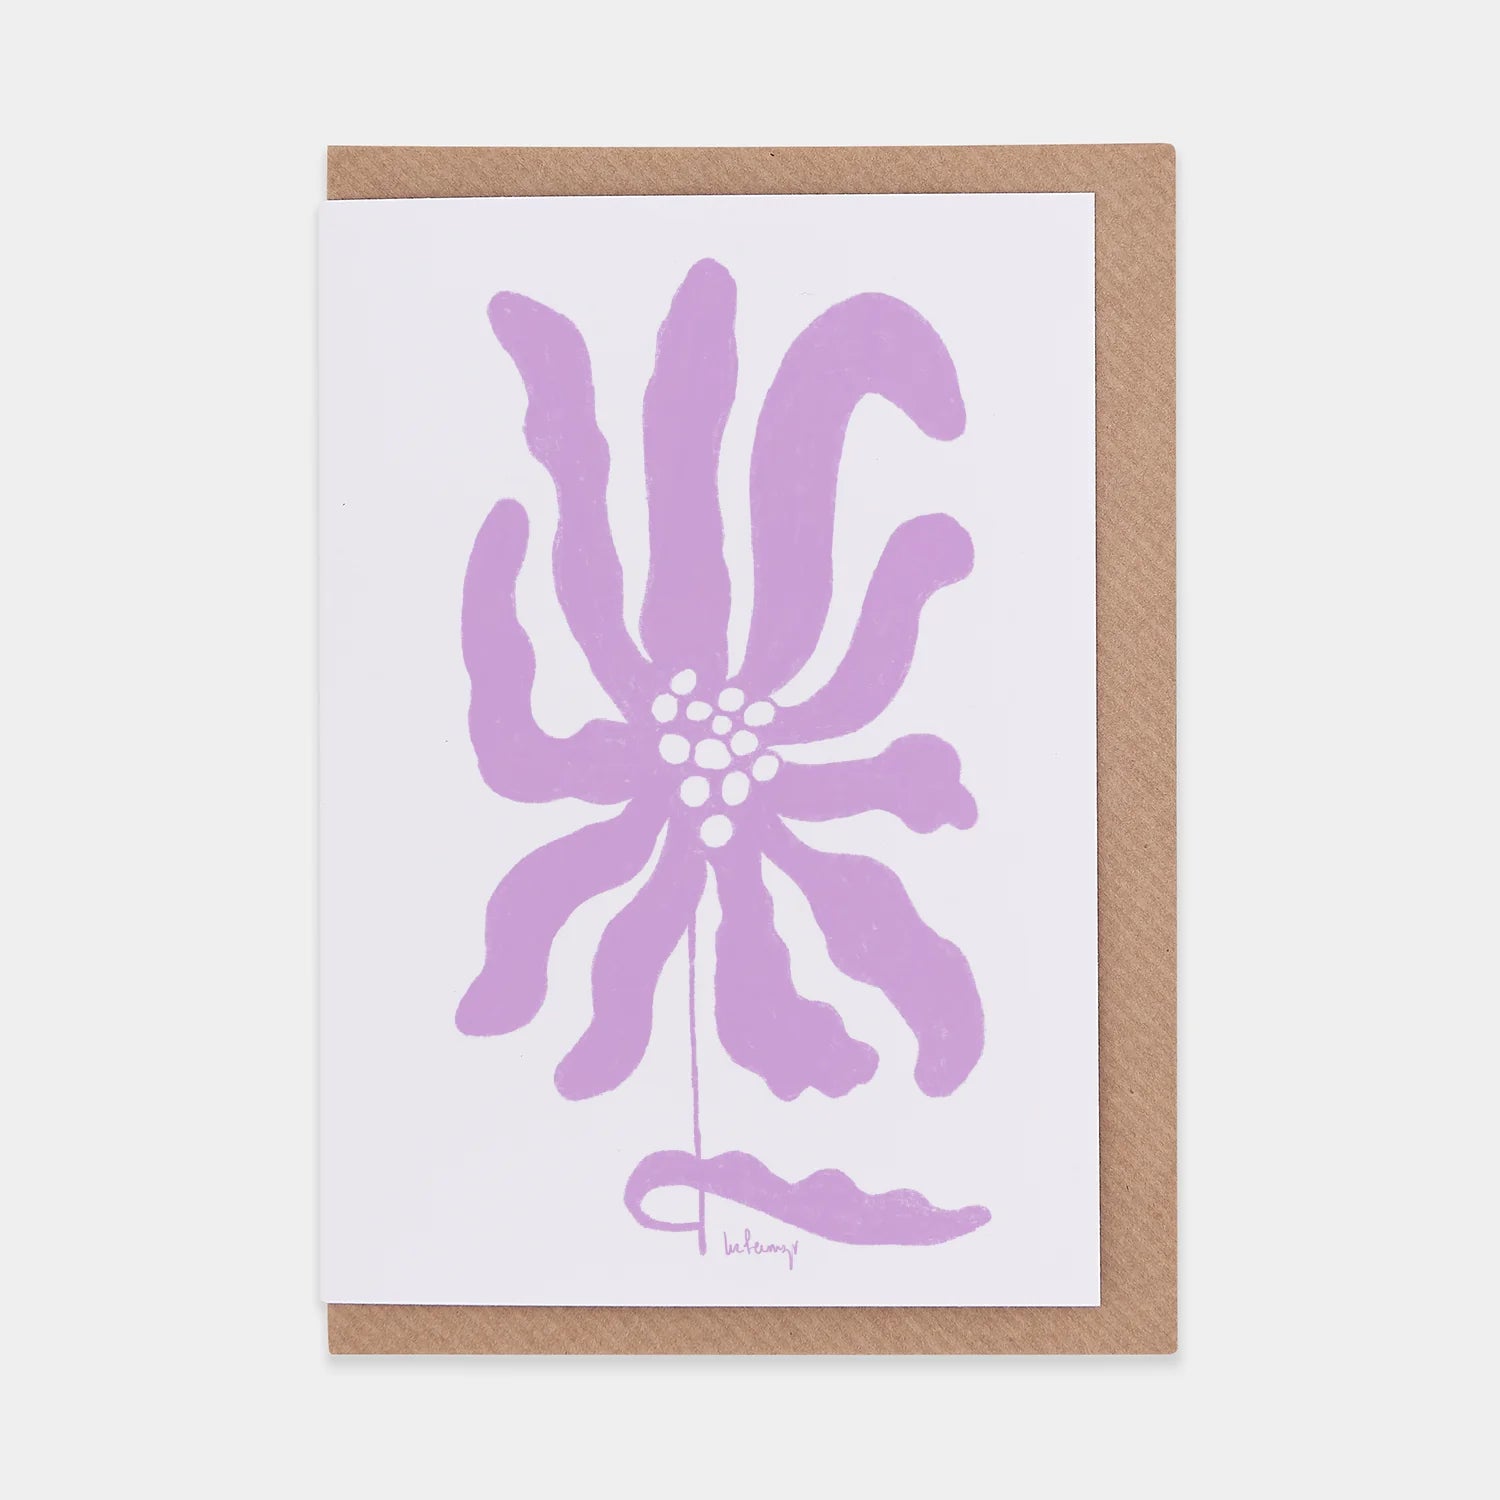 Greetings card featuring abstract purple flower. White background and brown envelope.